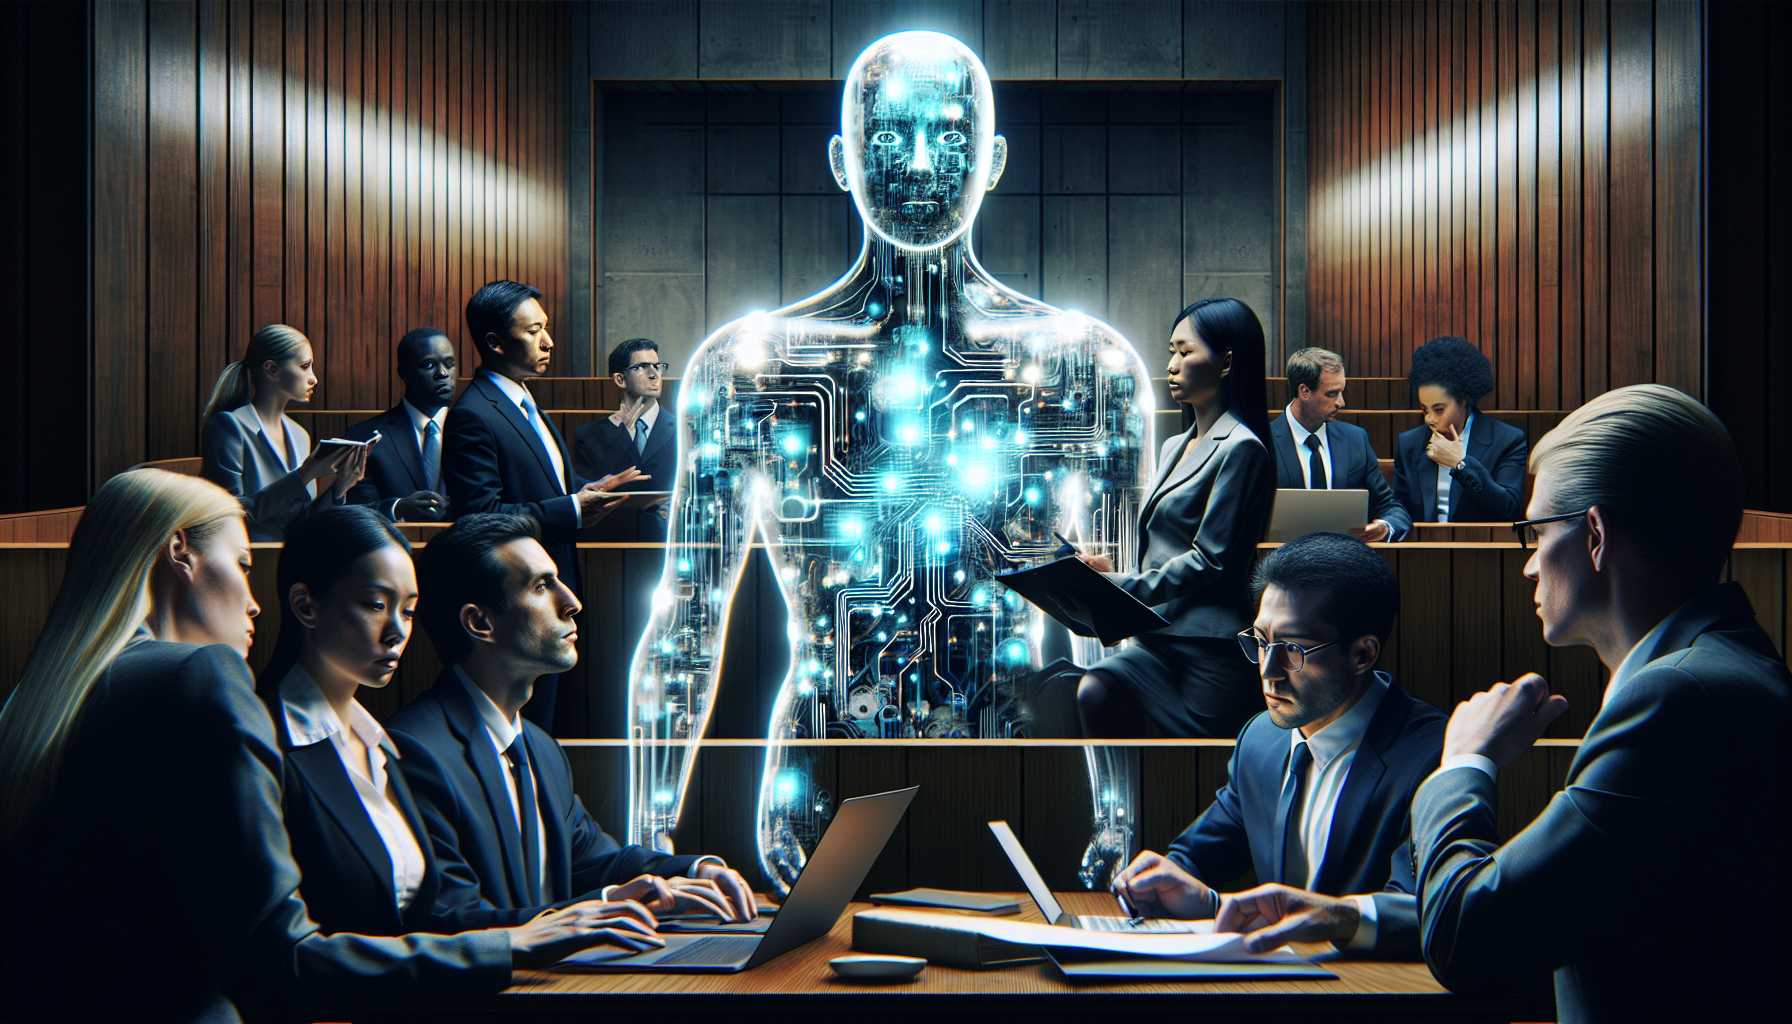 courtroom drama scene with AI and businessmen